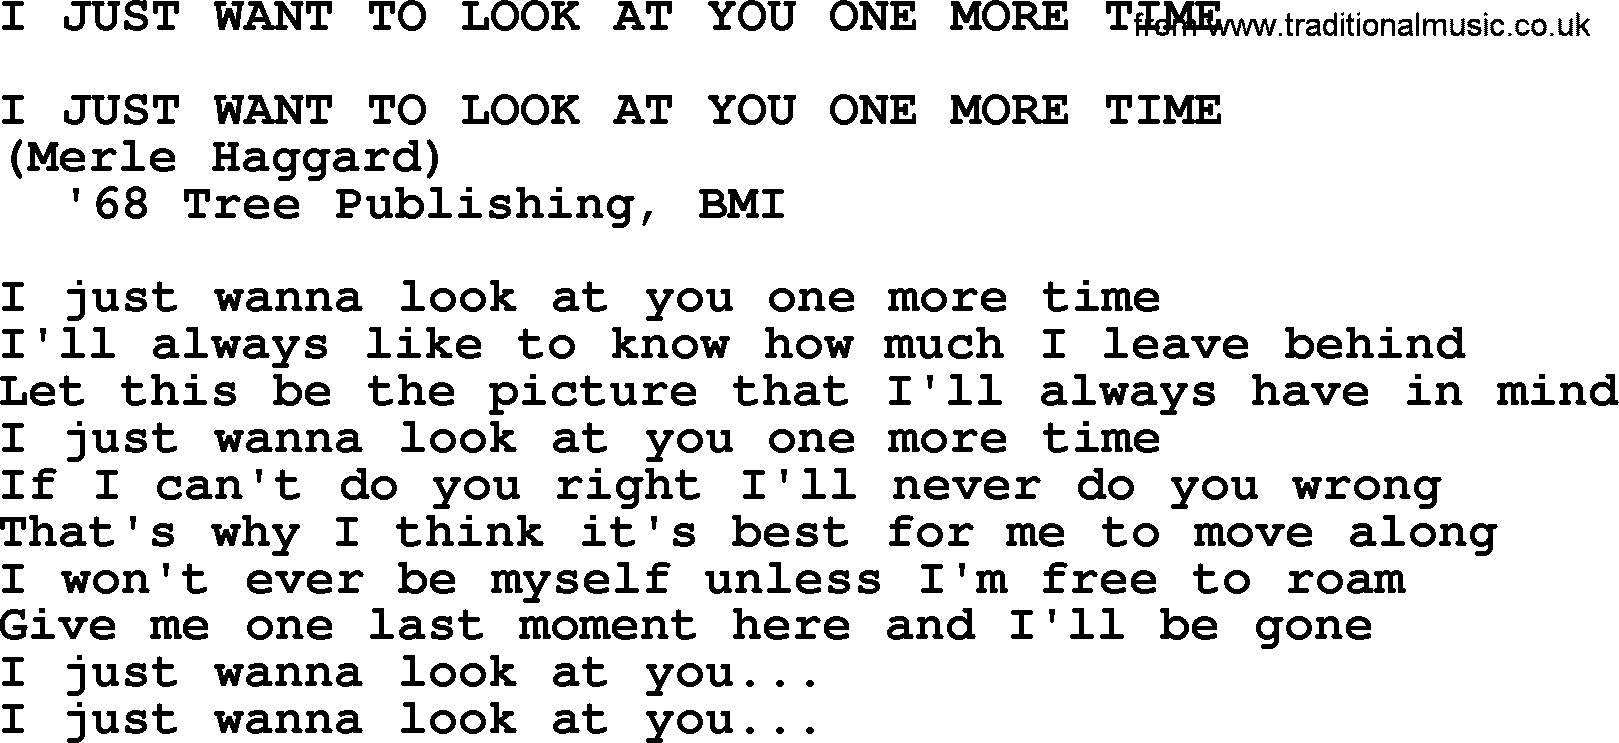 Merle Haggard song: I Just Want To Look At You One More Time, lyrics.